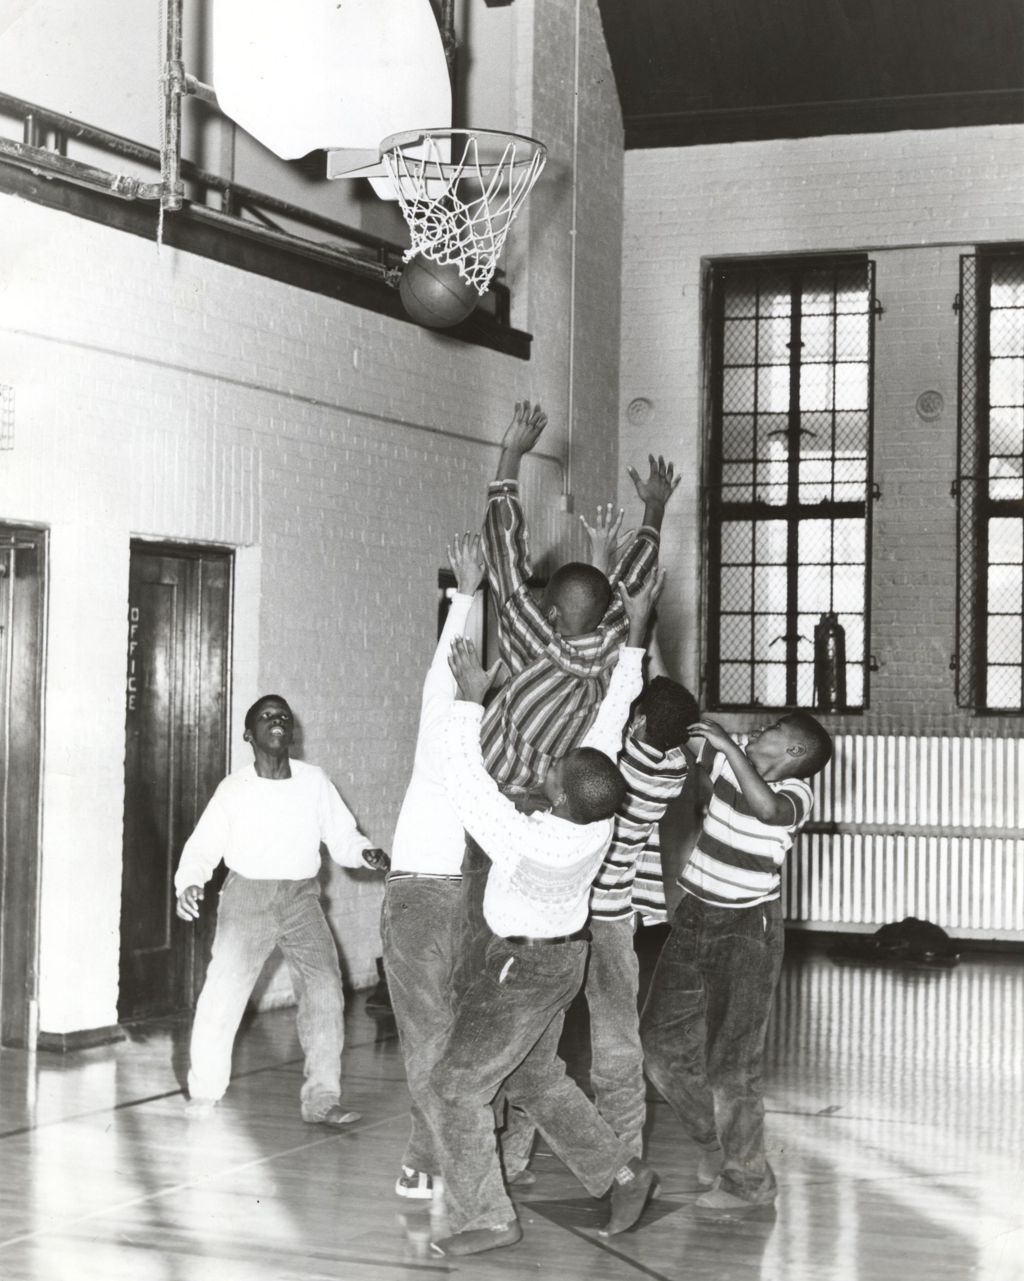 Boys playing basketball in a gymnasium, Marcy Center